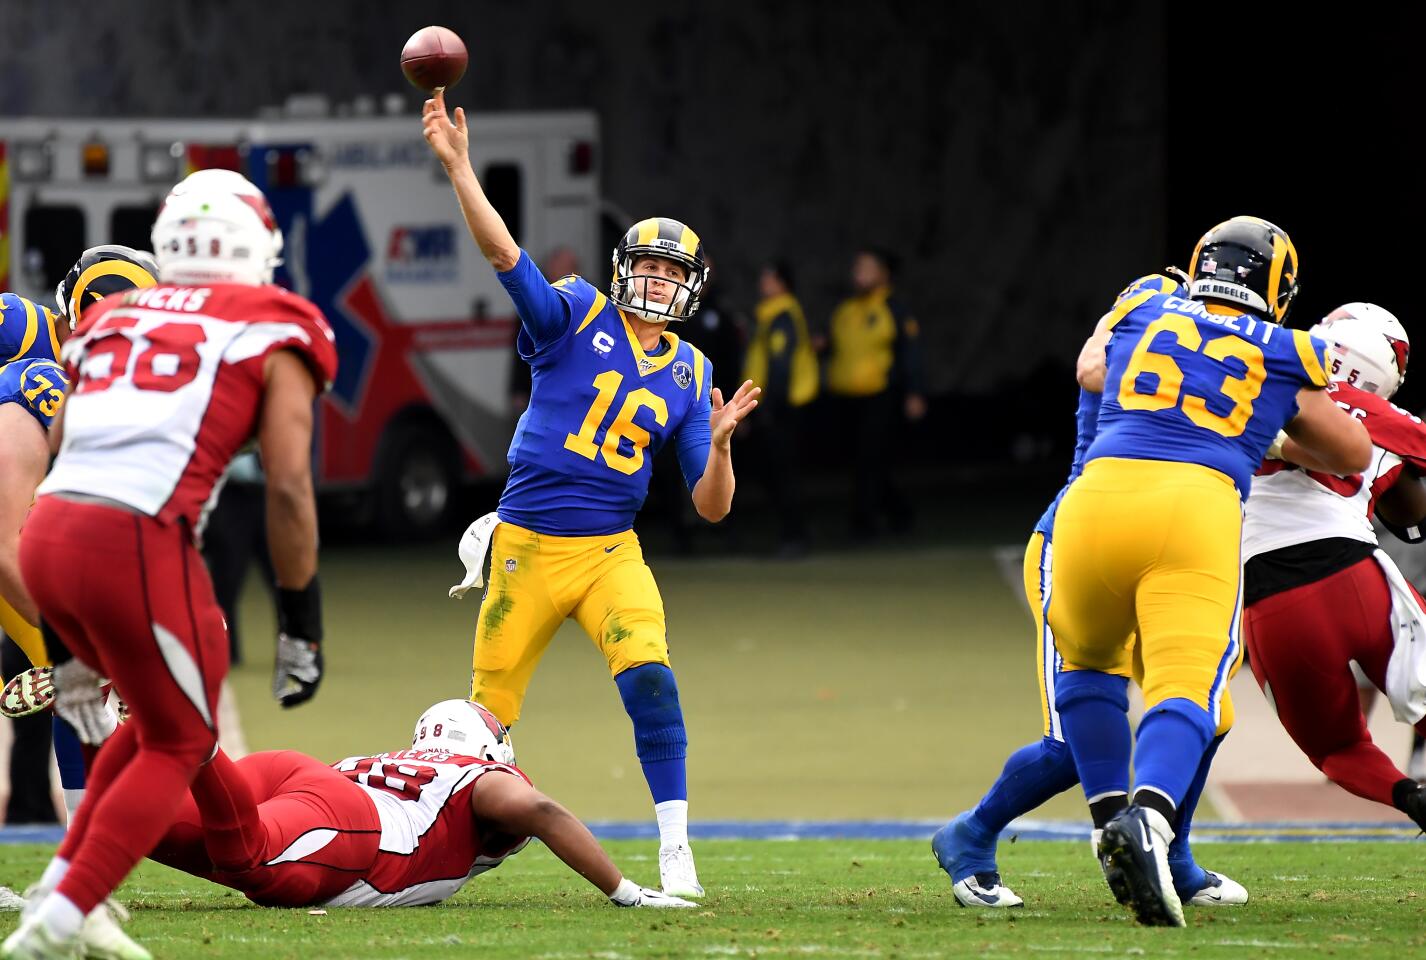 Rams quarterback Jared Goff throws a pass against the Arizona Cardinals in the third quarter.